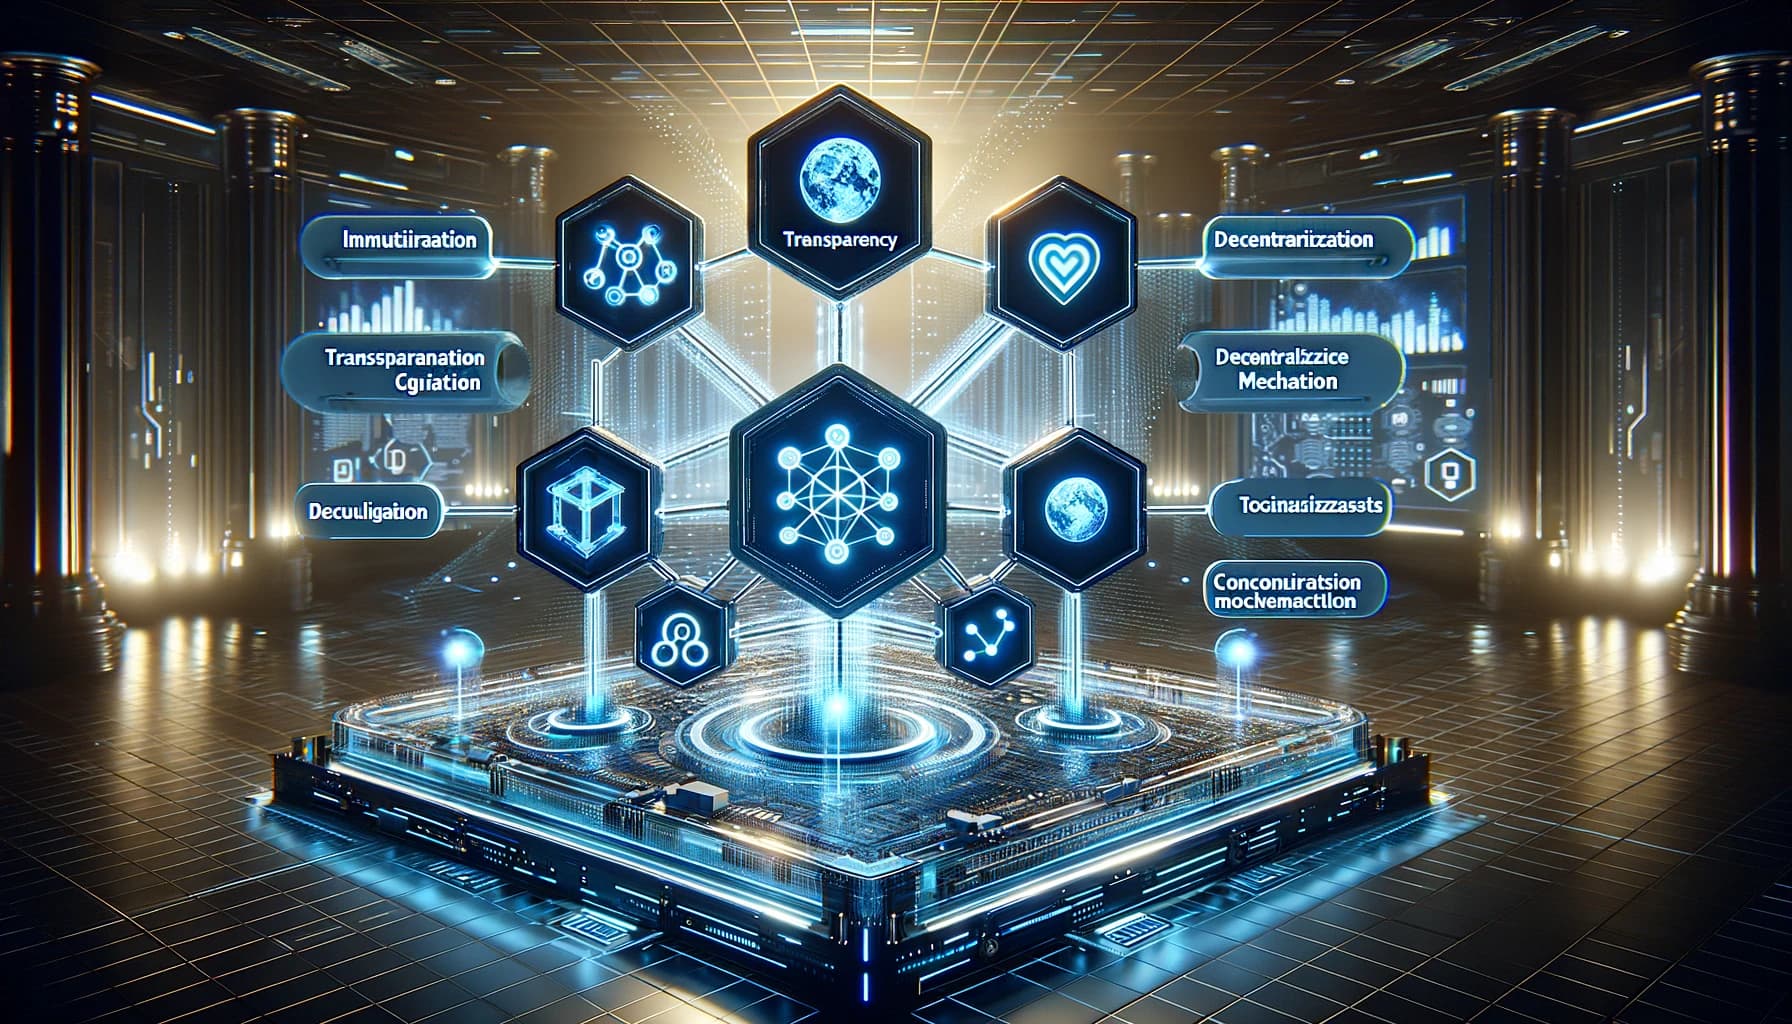 Bucket Technologies image showing a display of icon shields, linked to each other, indicating features of a blockchain process.